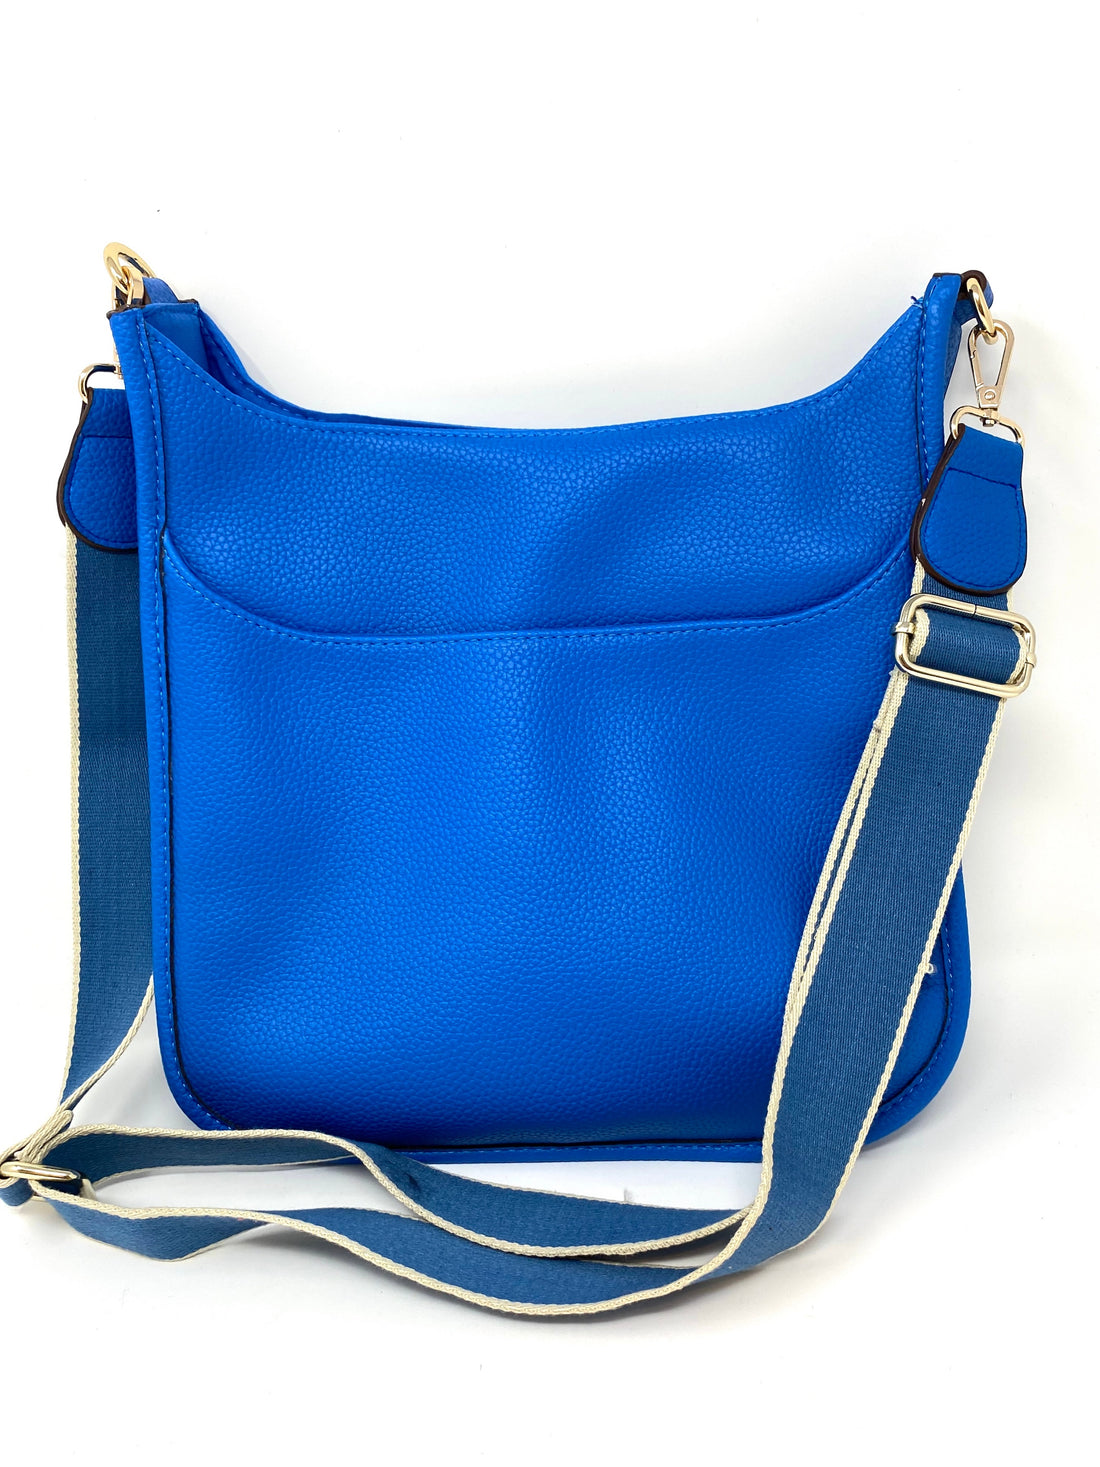 Saddle Bag in Vegan Leather in Electric Blue